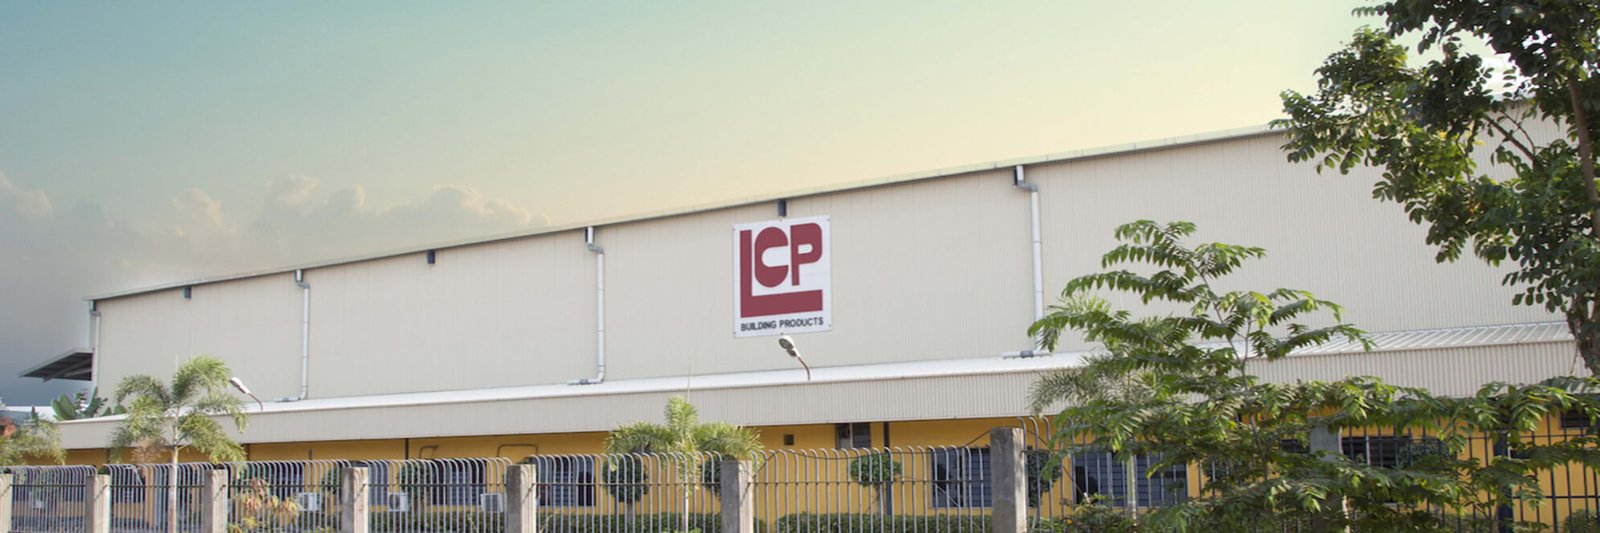 best roof sheet manufacturer In India: LCP Sliders